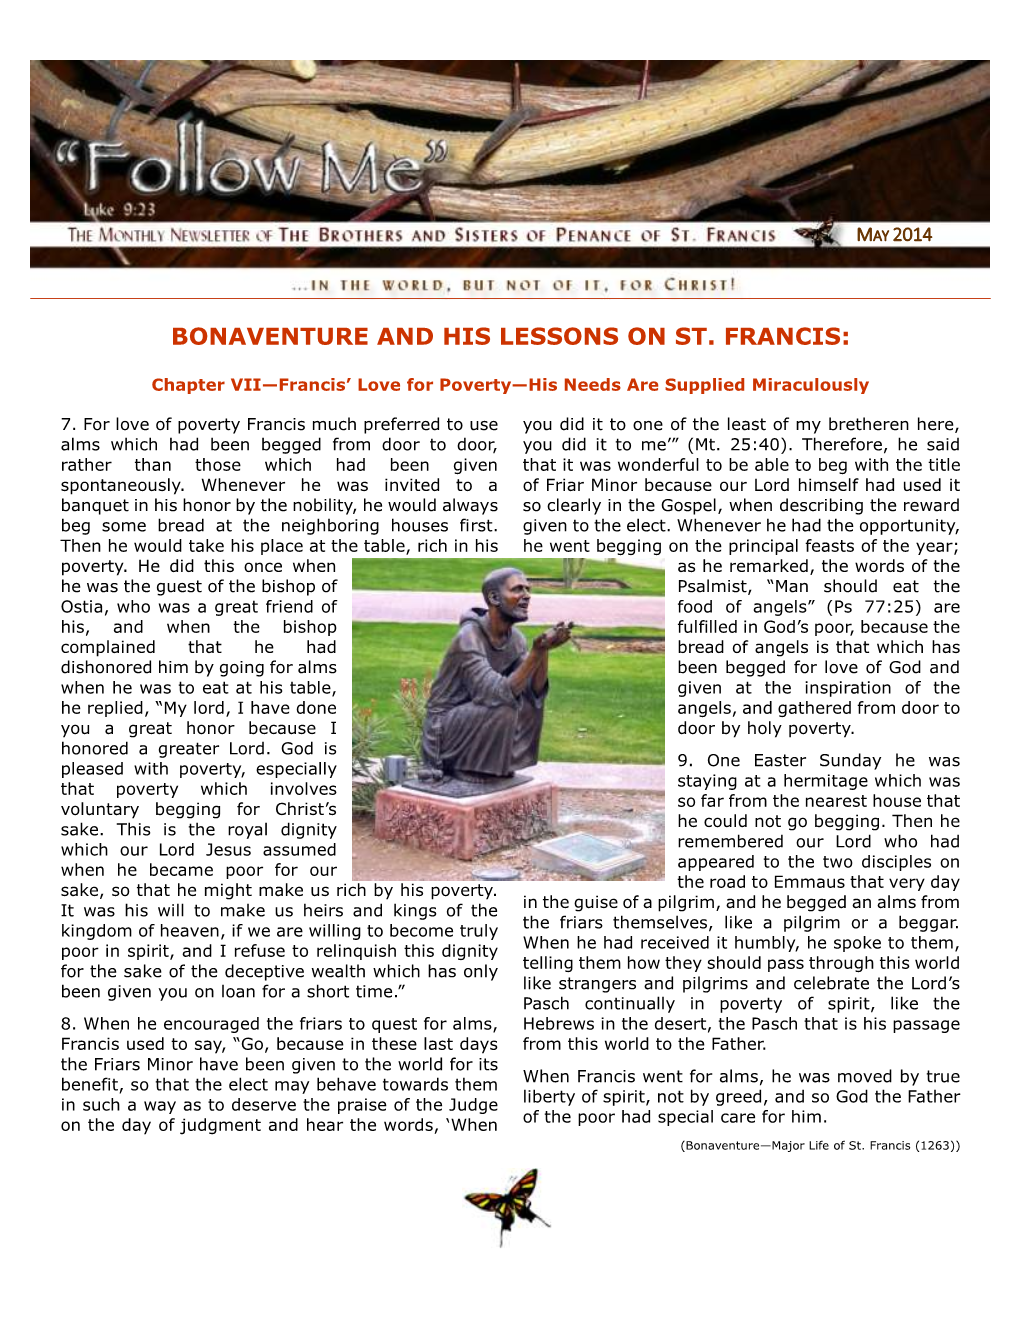 Bonaventure and His Lessons on St. Francis